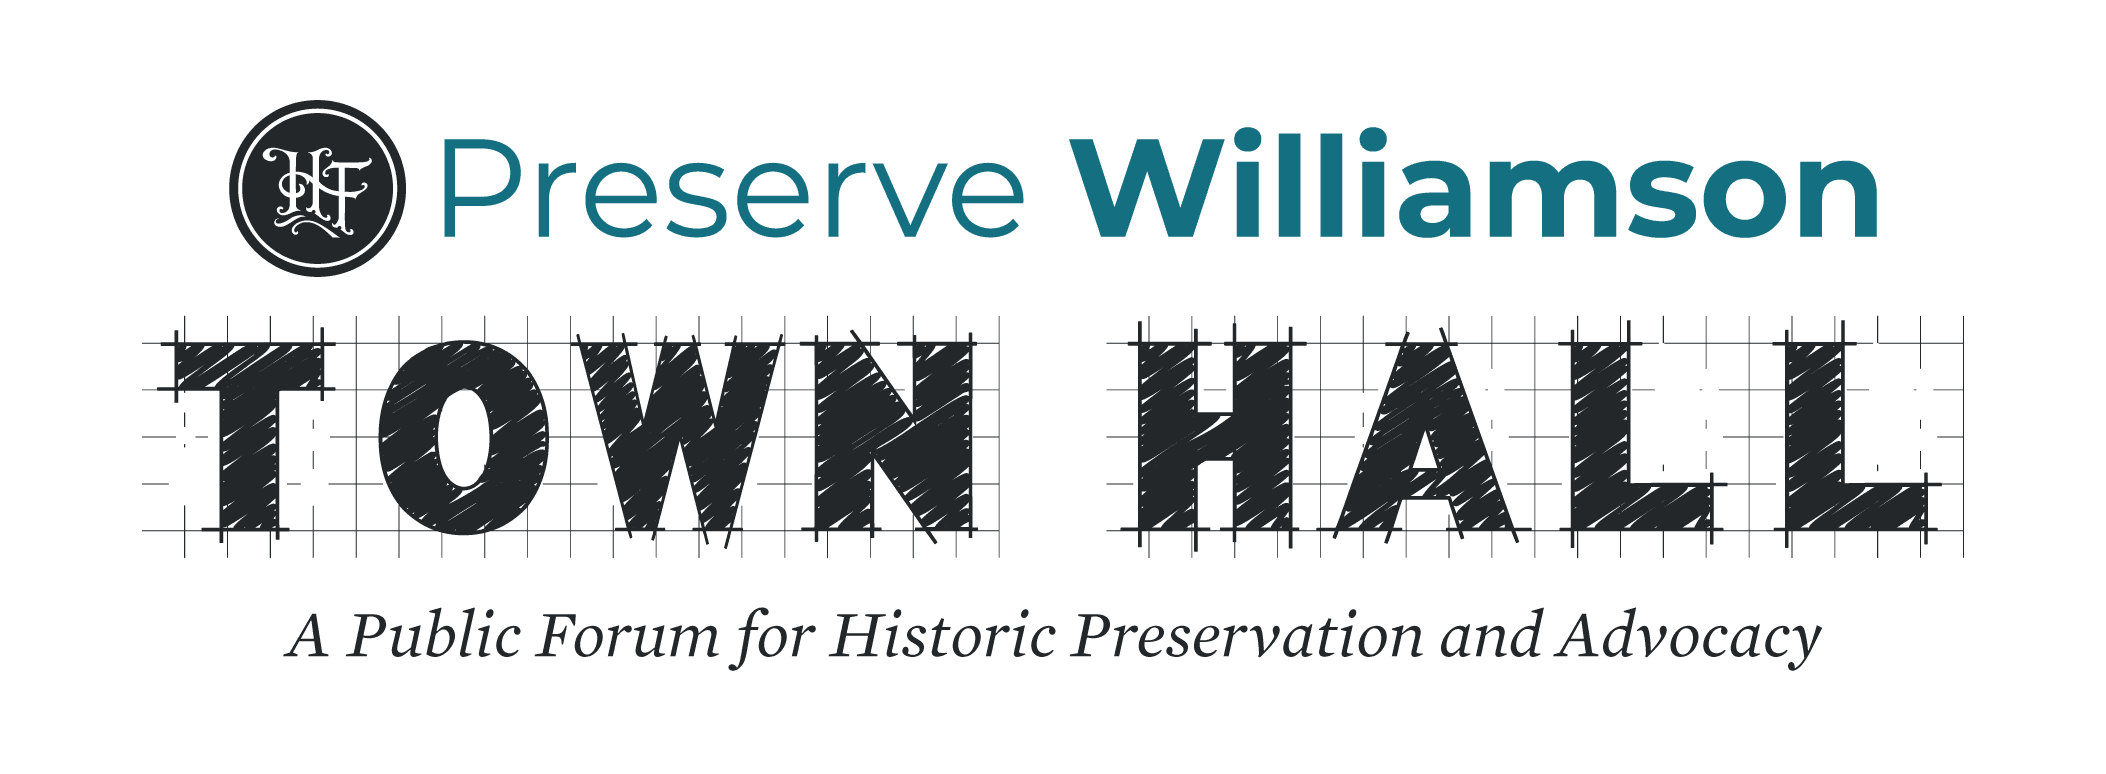 Heritage Foundation of Williamson County and Nolensville Historical Society to Host Preservation Event